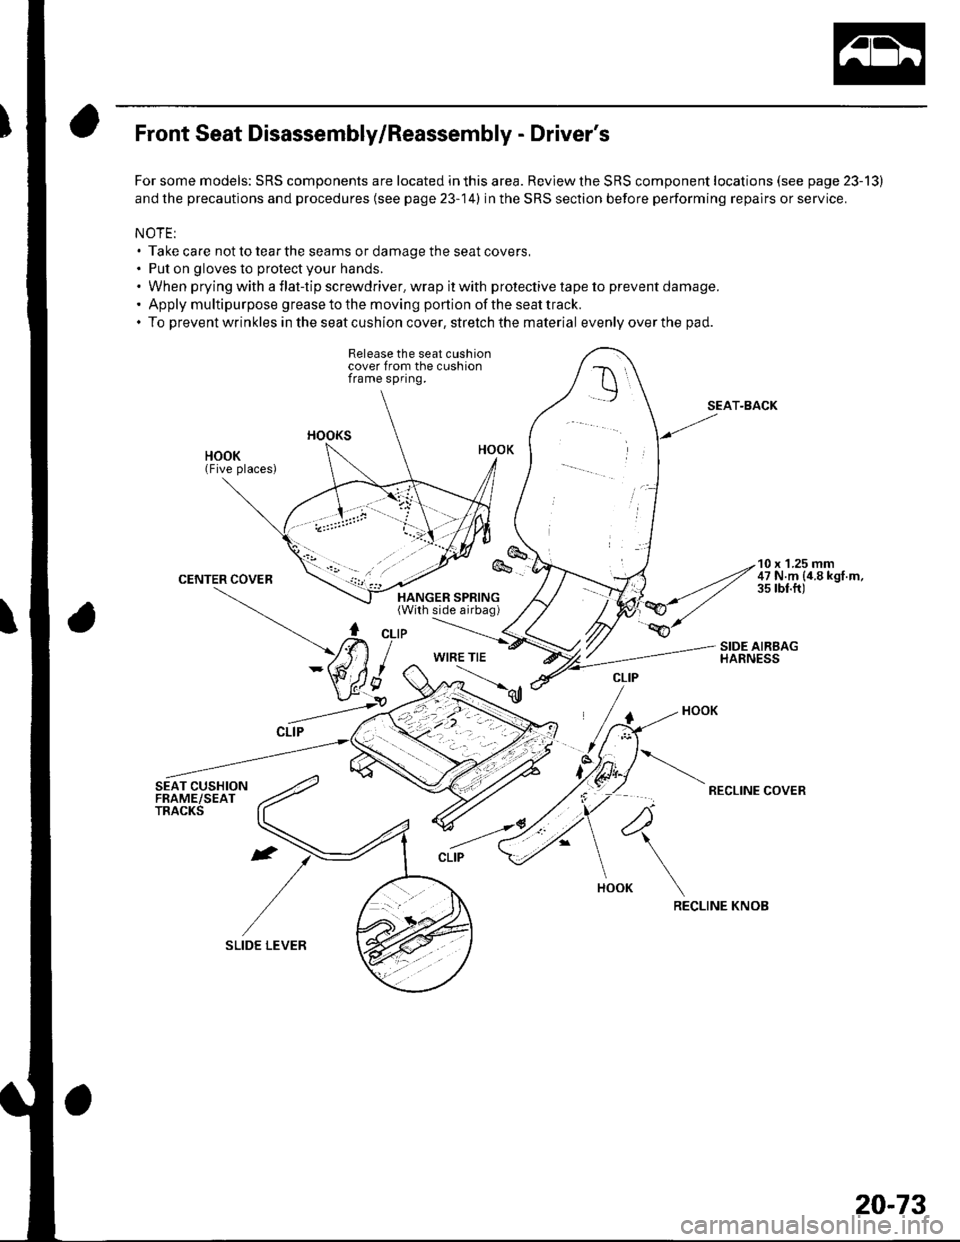 HONDA CIVIC 2003 7.G Workshop Manual Front Seat Disassembly/Reassembly - Drivers
For some models: SRS components are located in this area. Review the SRS component locations (see page 23-13)
and the precautions and procedures (see page 